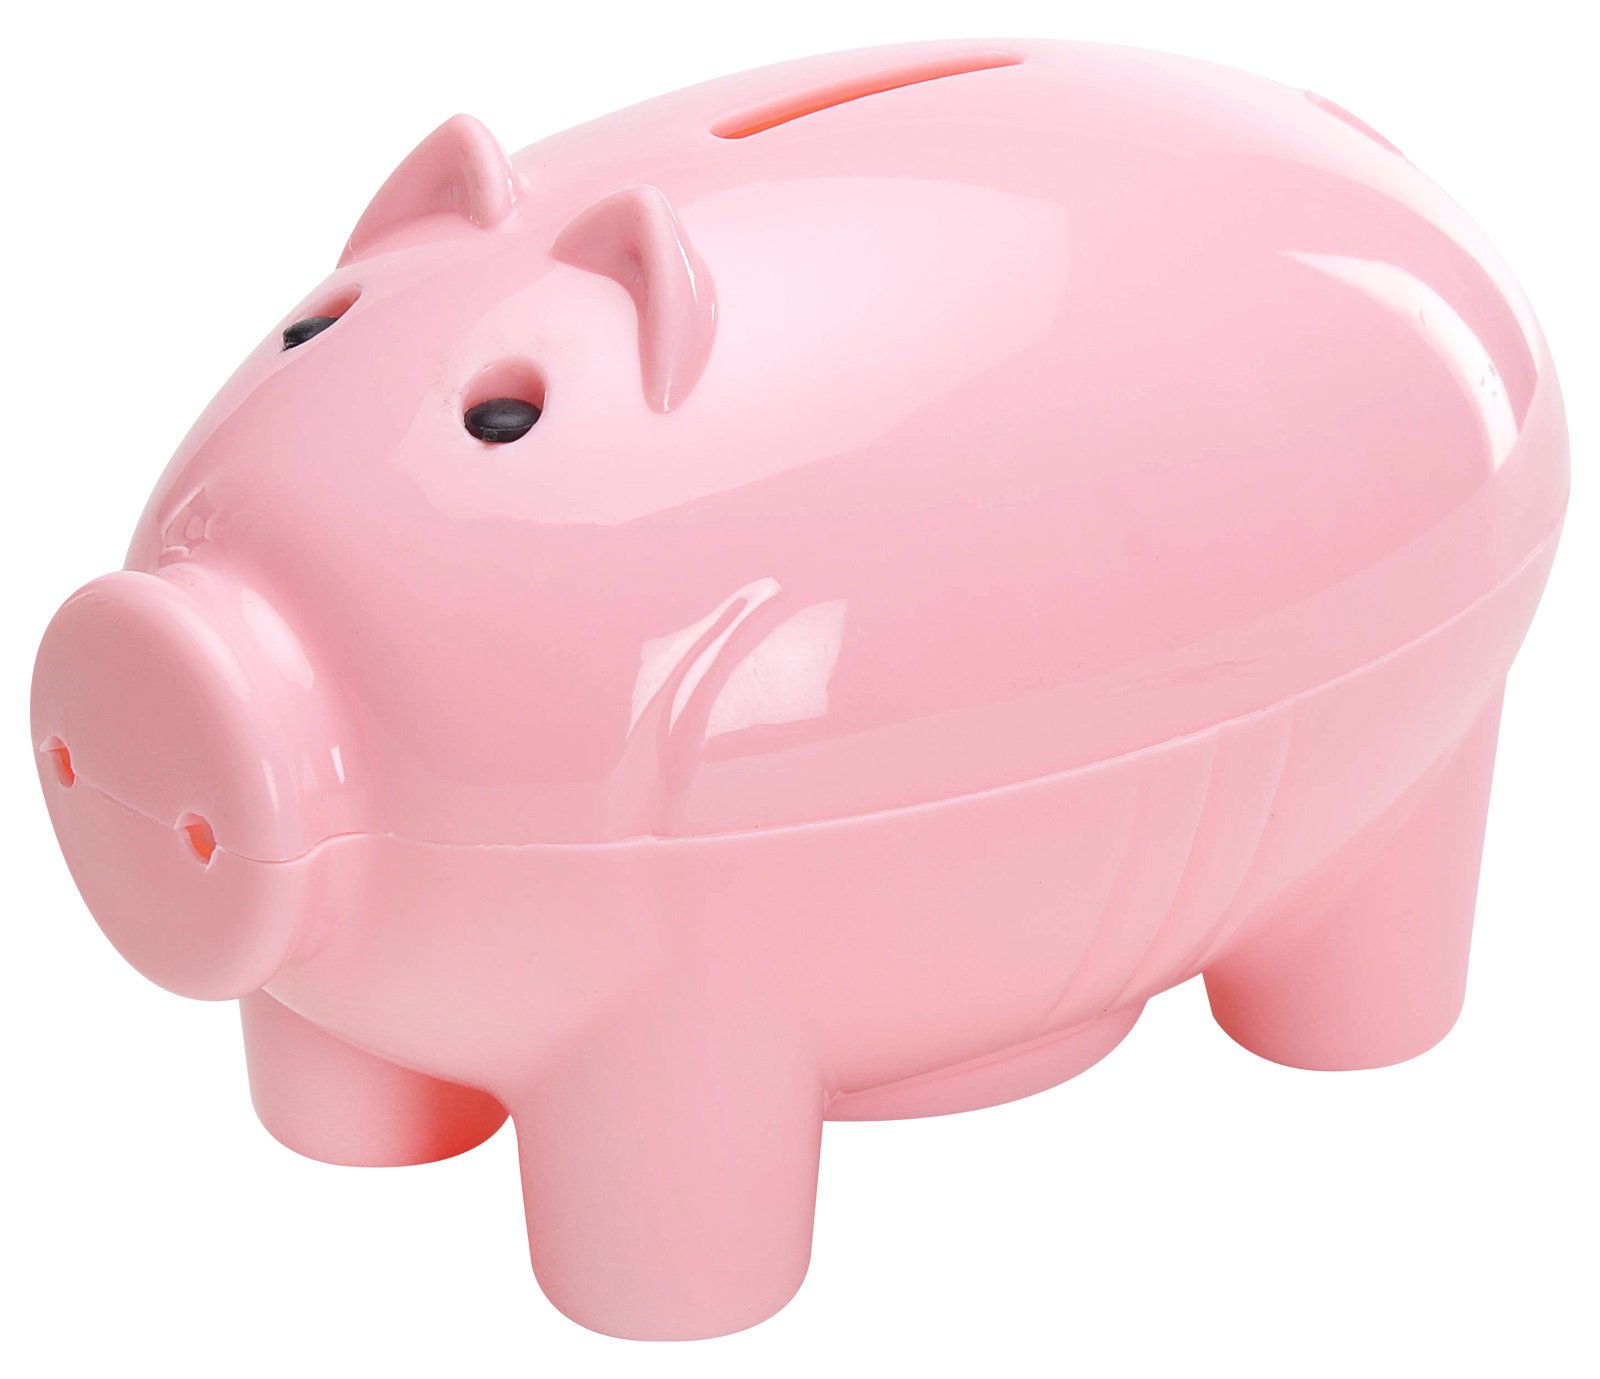 Buddyz Pig Coin Bank Online in India, Buy at Best Price from ...